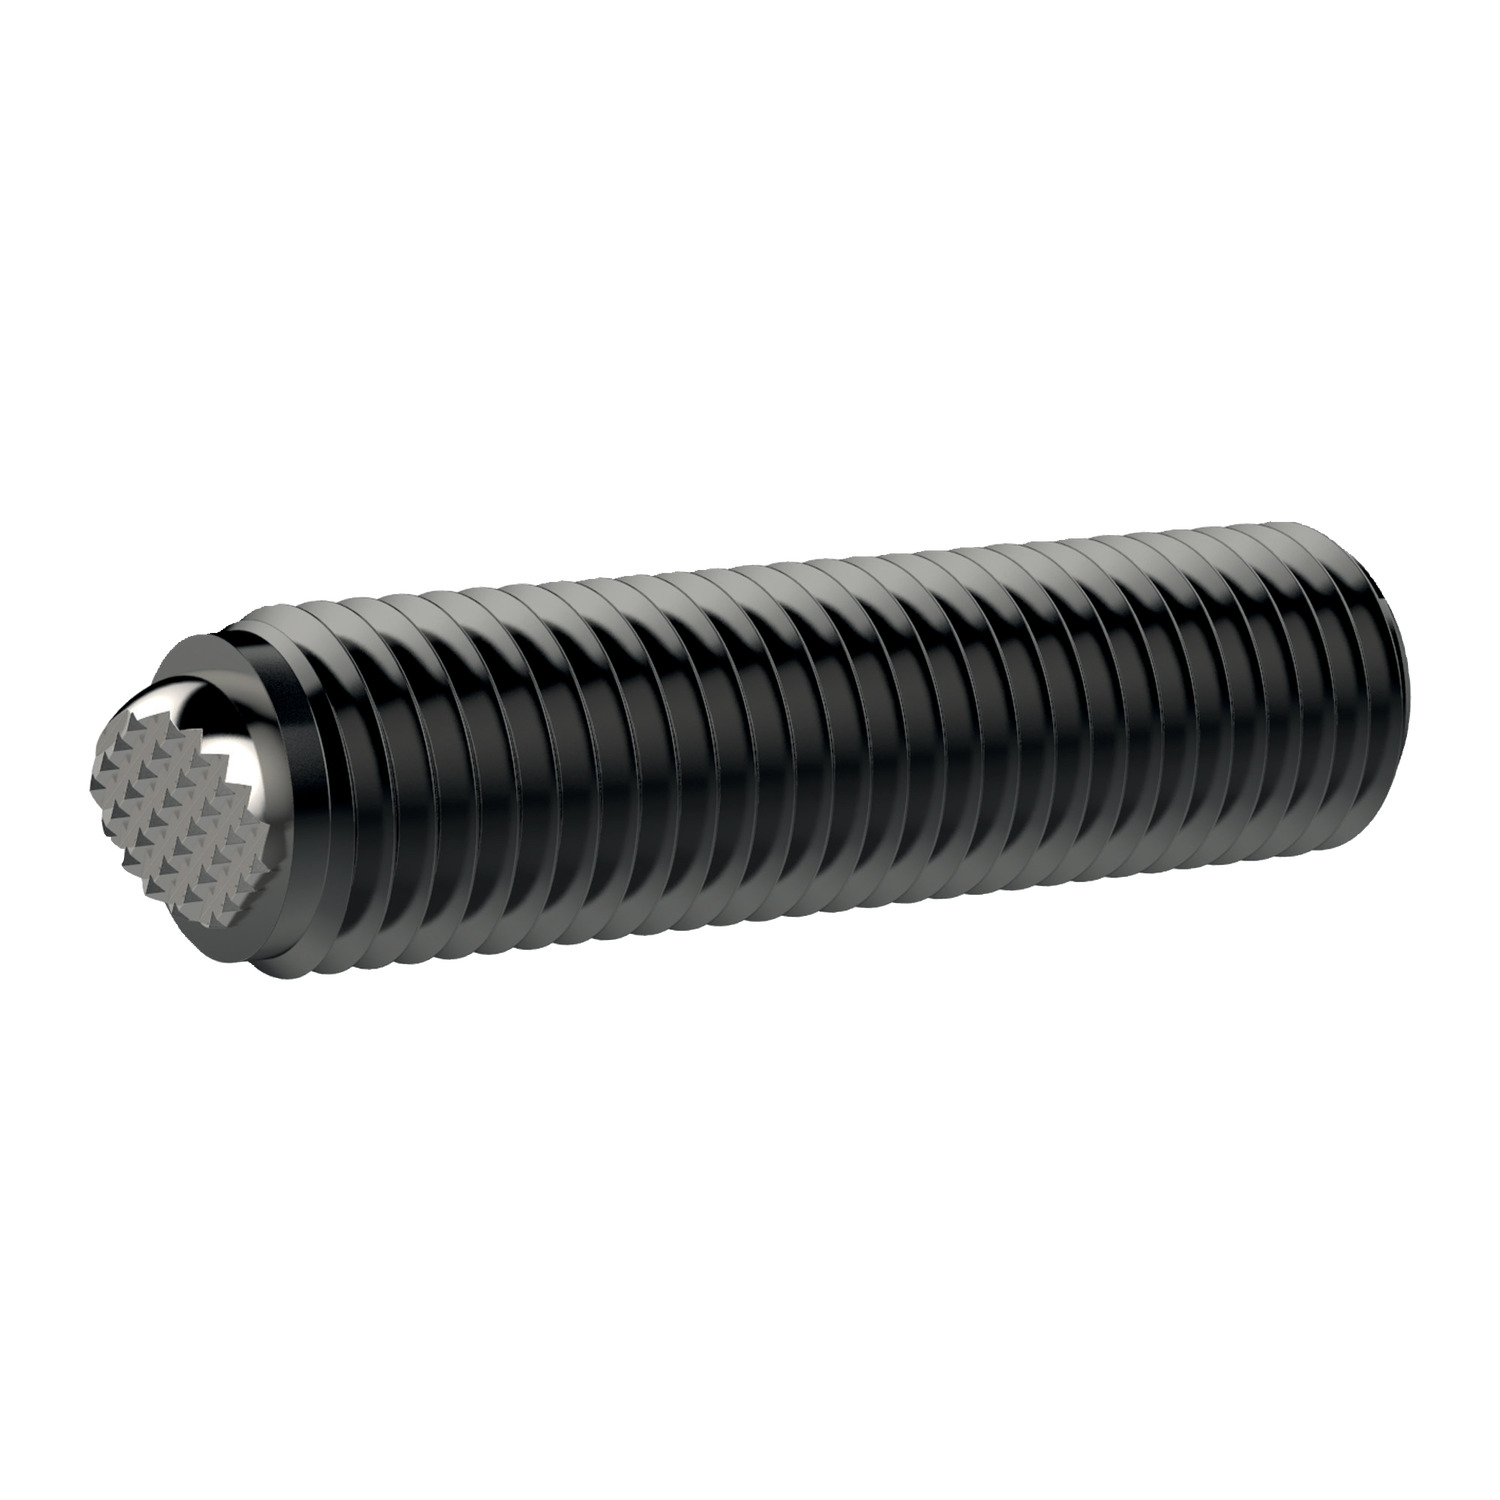 Thrust Screws - Ball Ended The flat surface of the ball features a ribbed design providing an alternative surface for better grip. Sizes included in the standard range are M8- M24.